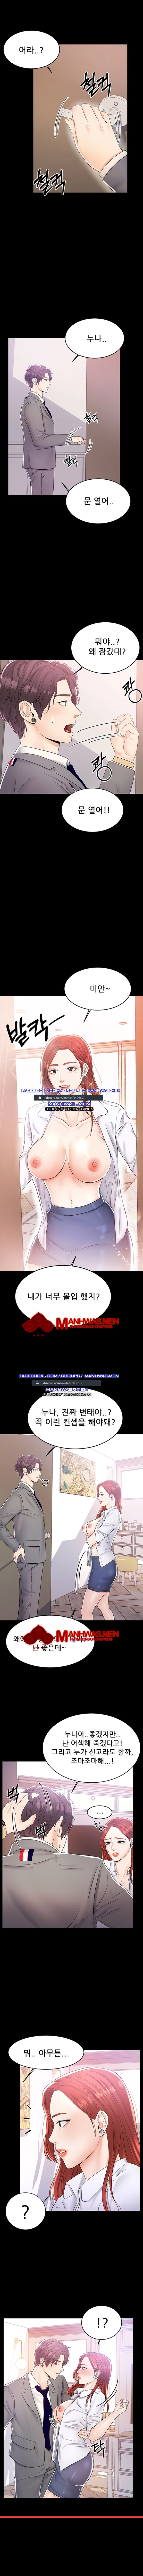 High Tension Raw - Chapter 6 Page 6